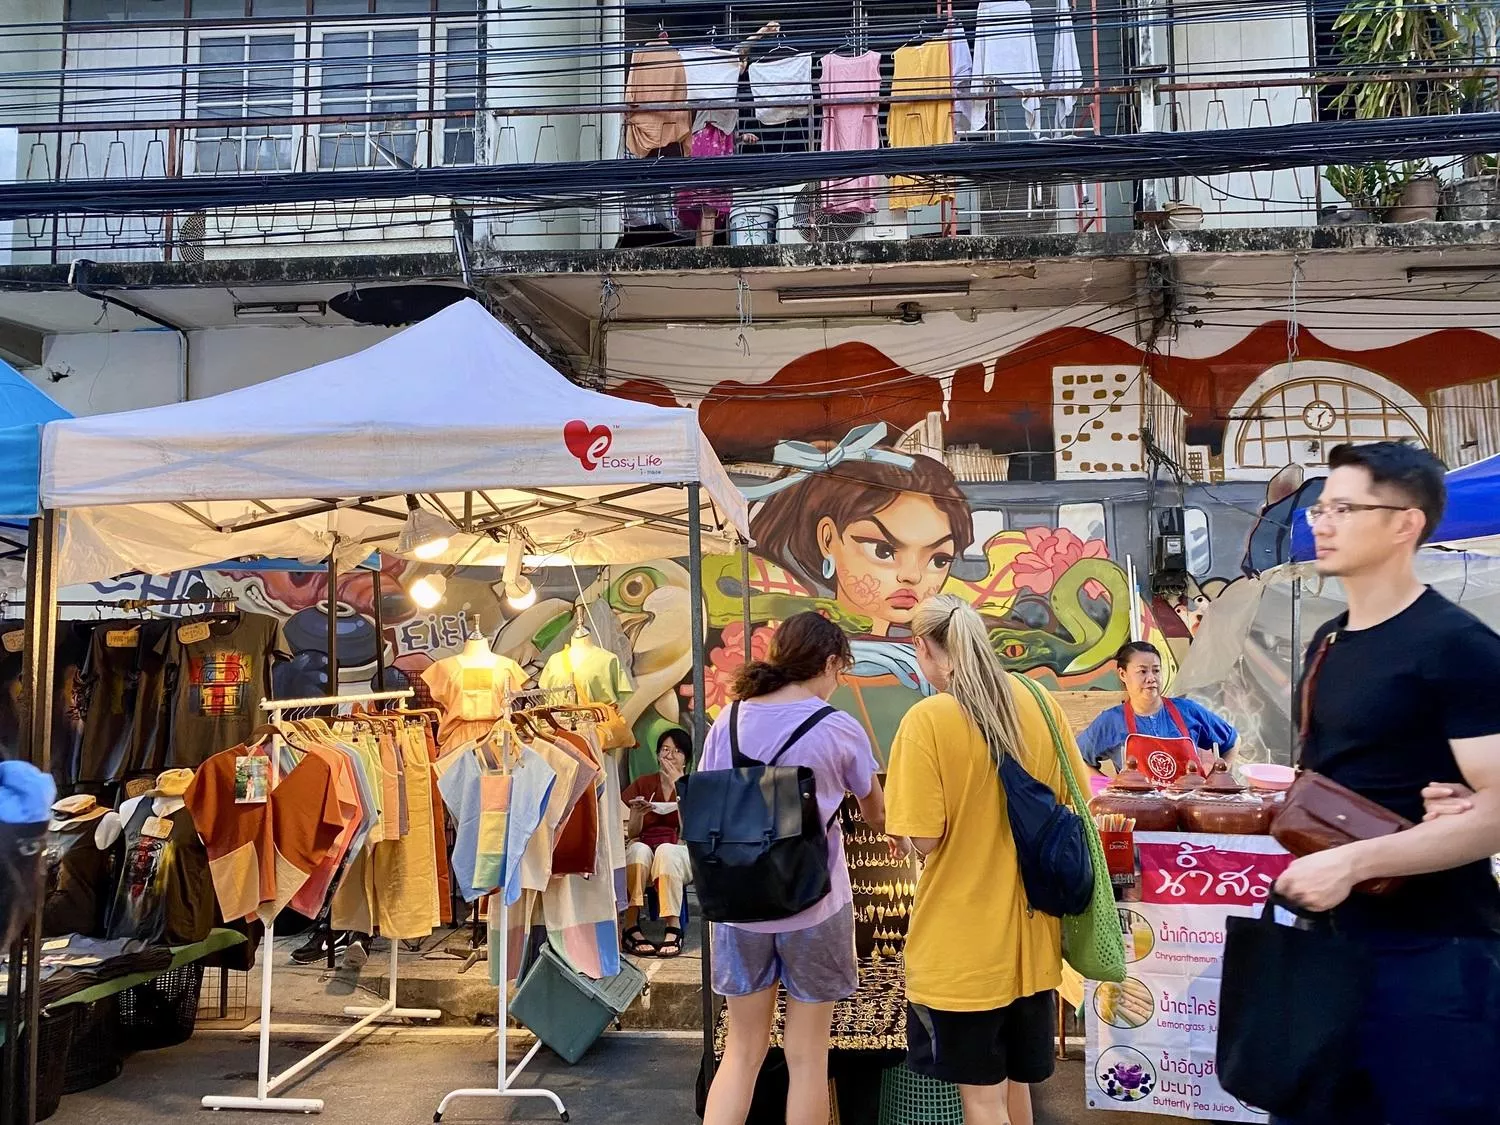 People and market stands with graffiti wallpainting in the background